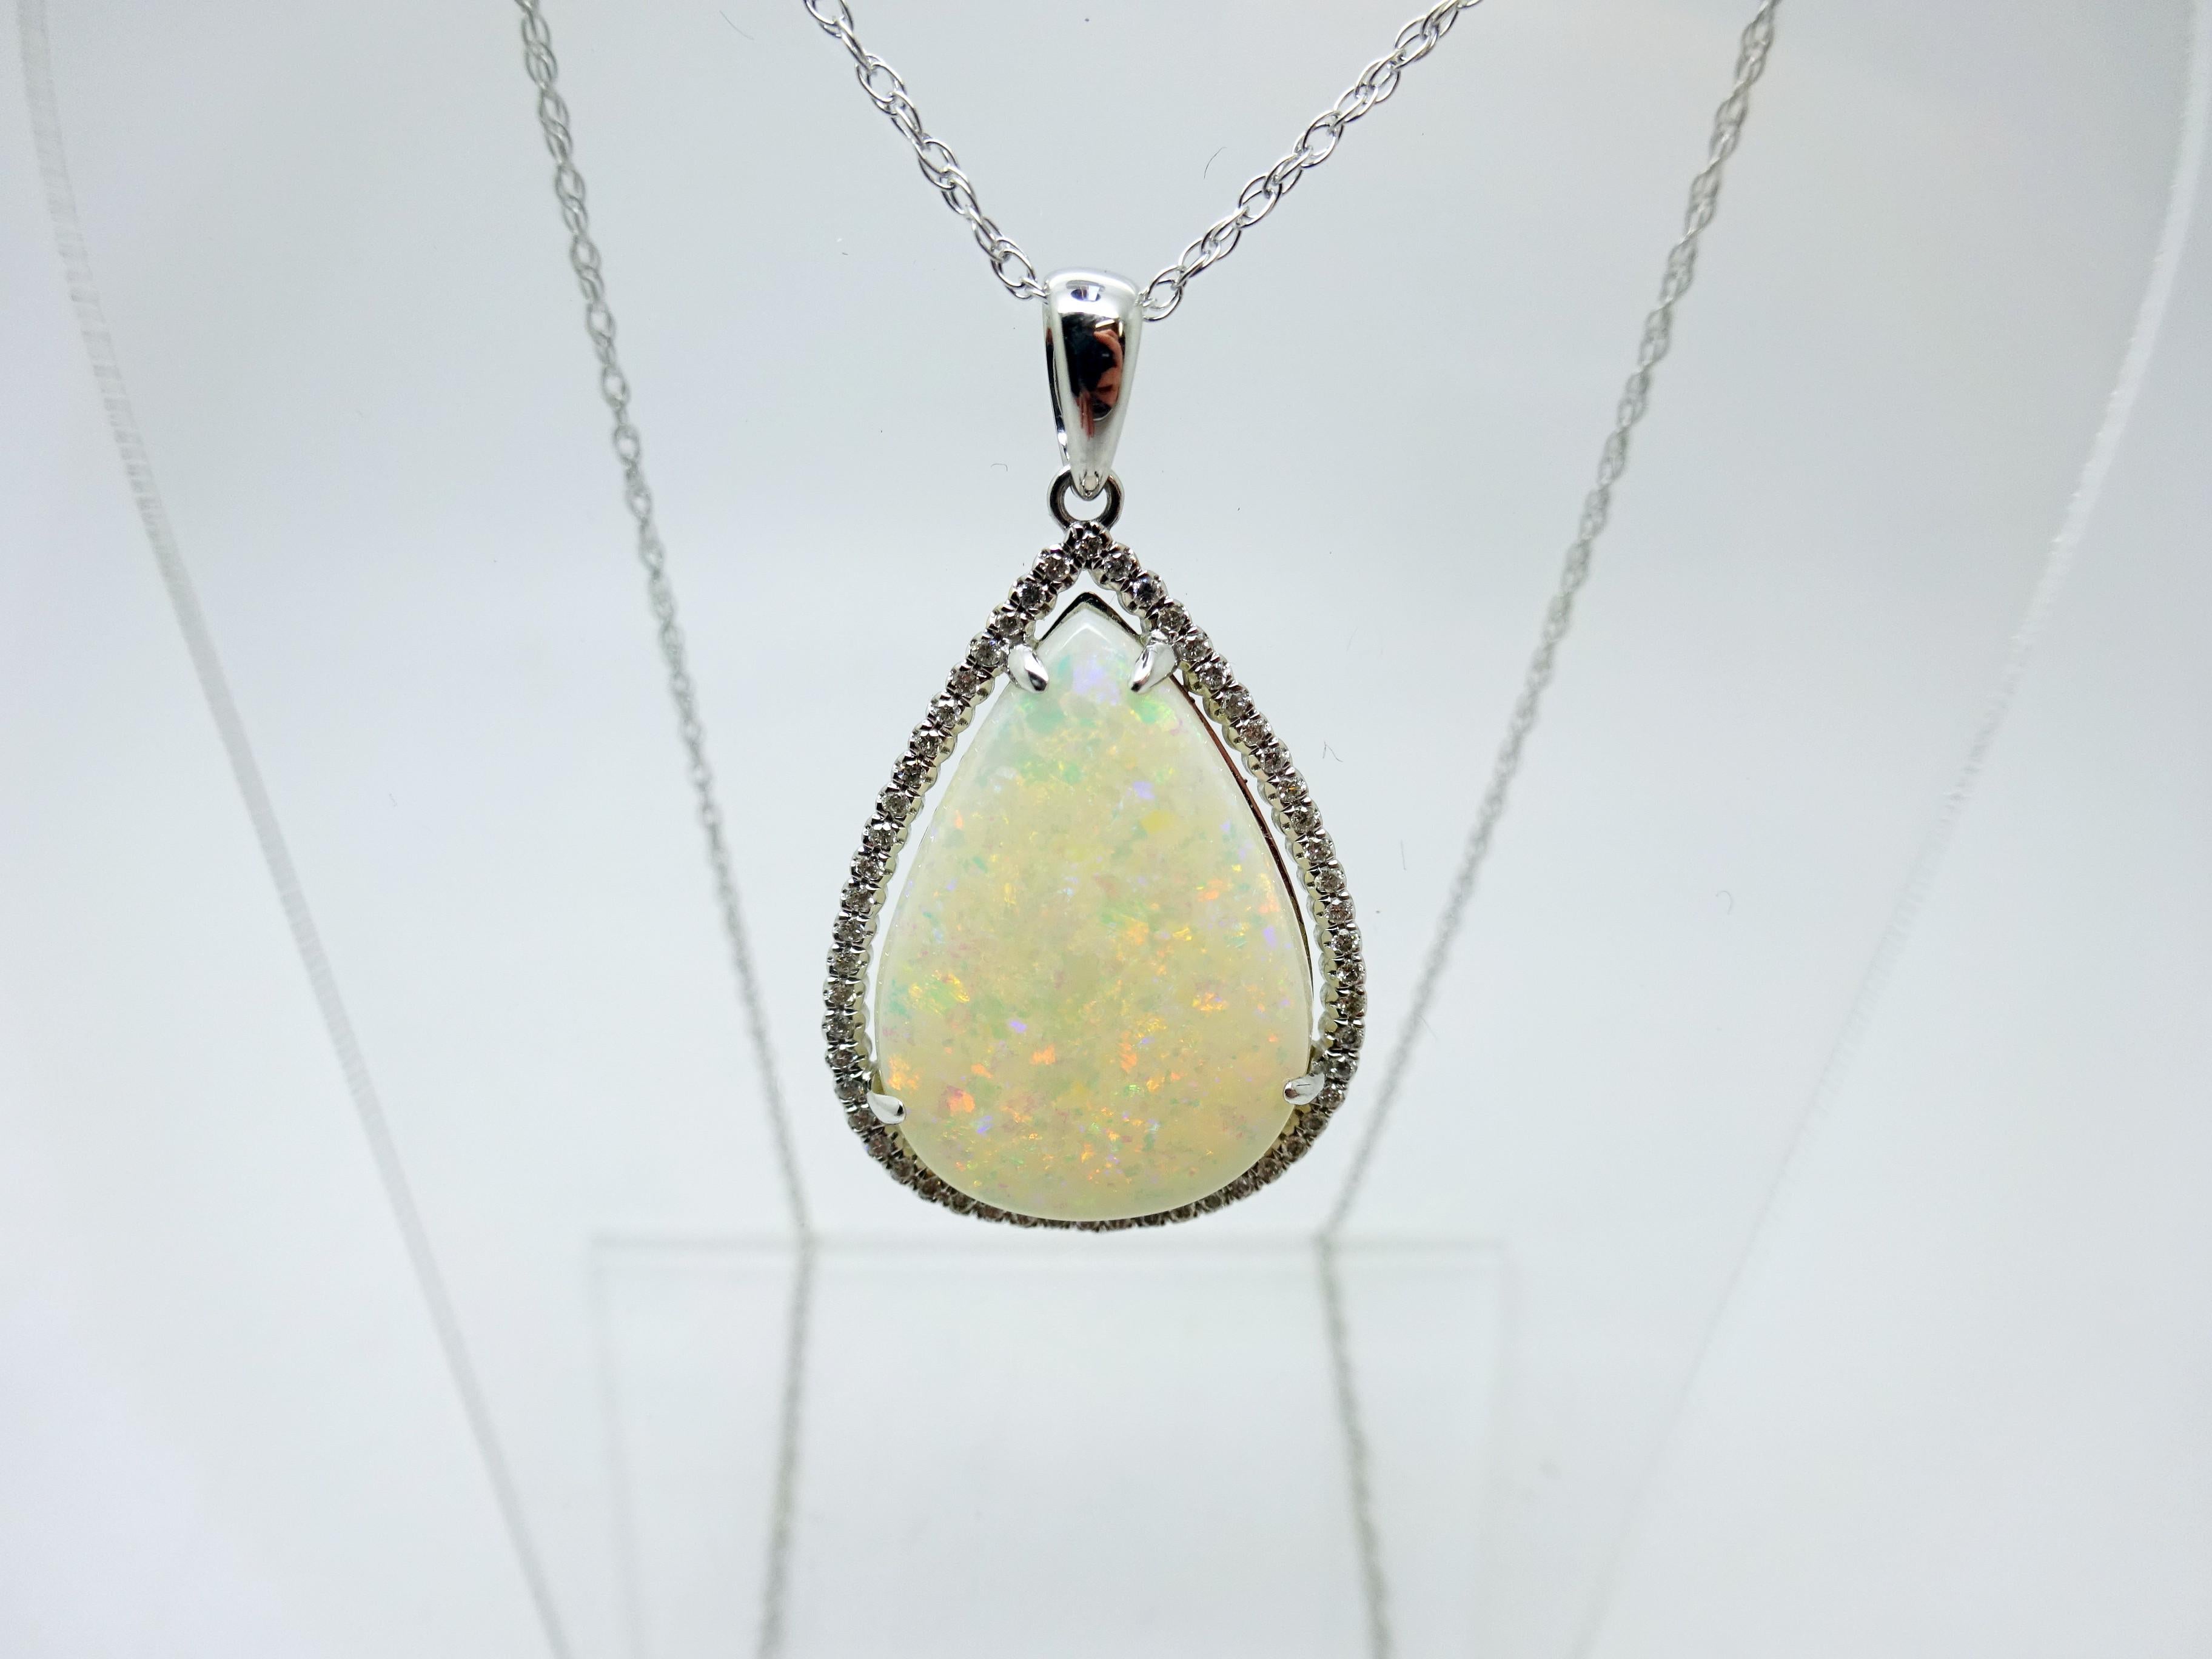 14k Gold 5.67ct Pear Genuine Natural Opal Pendant with .16ct Diamonds (#3427)

Majestic 14k white gold opal and diamond pendant. The piece features a large beautiful pear shaped opal that weighs approximately 5.67 carats, with small round diamond